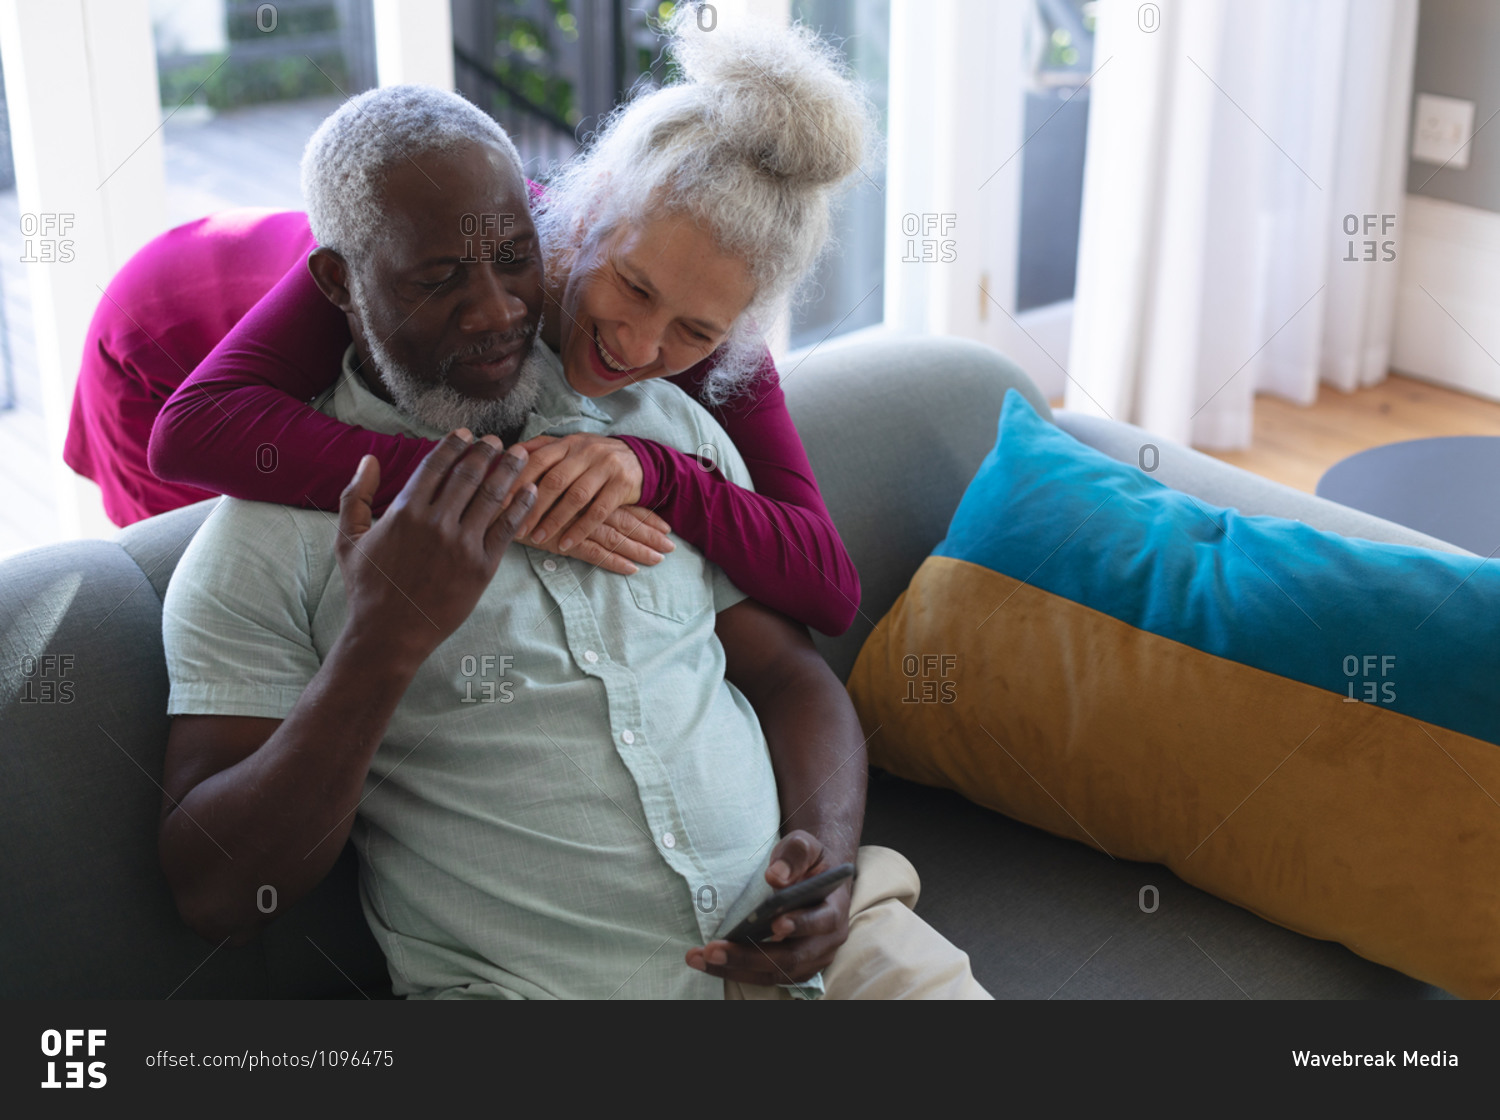 Senior mixed race couple embracing looking at smartphone together in living room. staying at home in self isolation during quarantine lockdown.